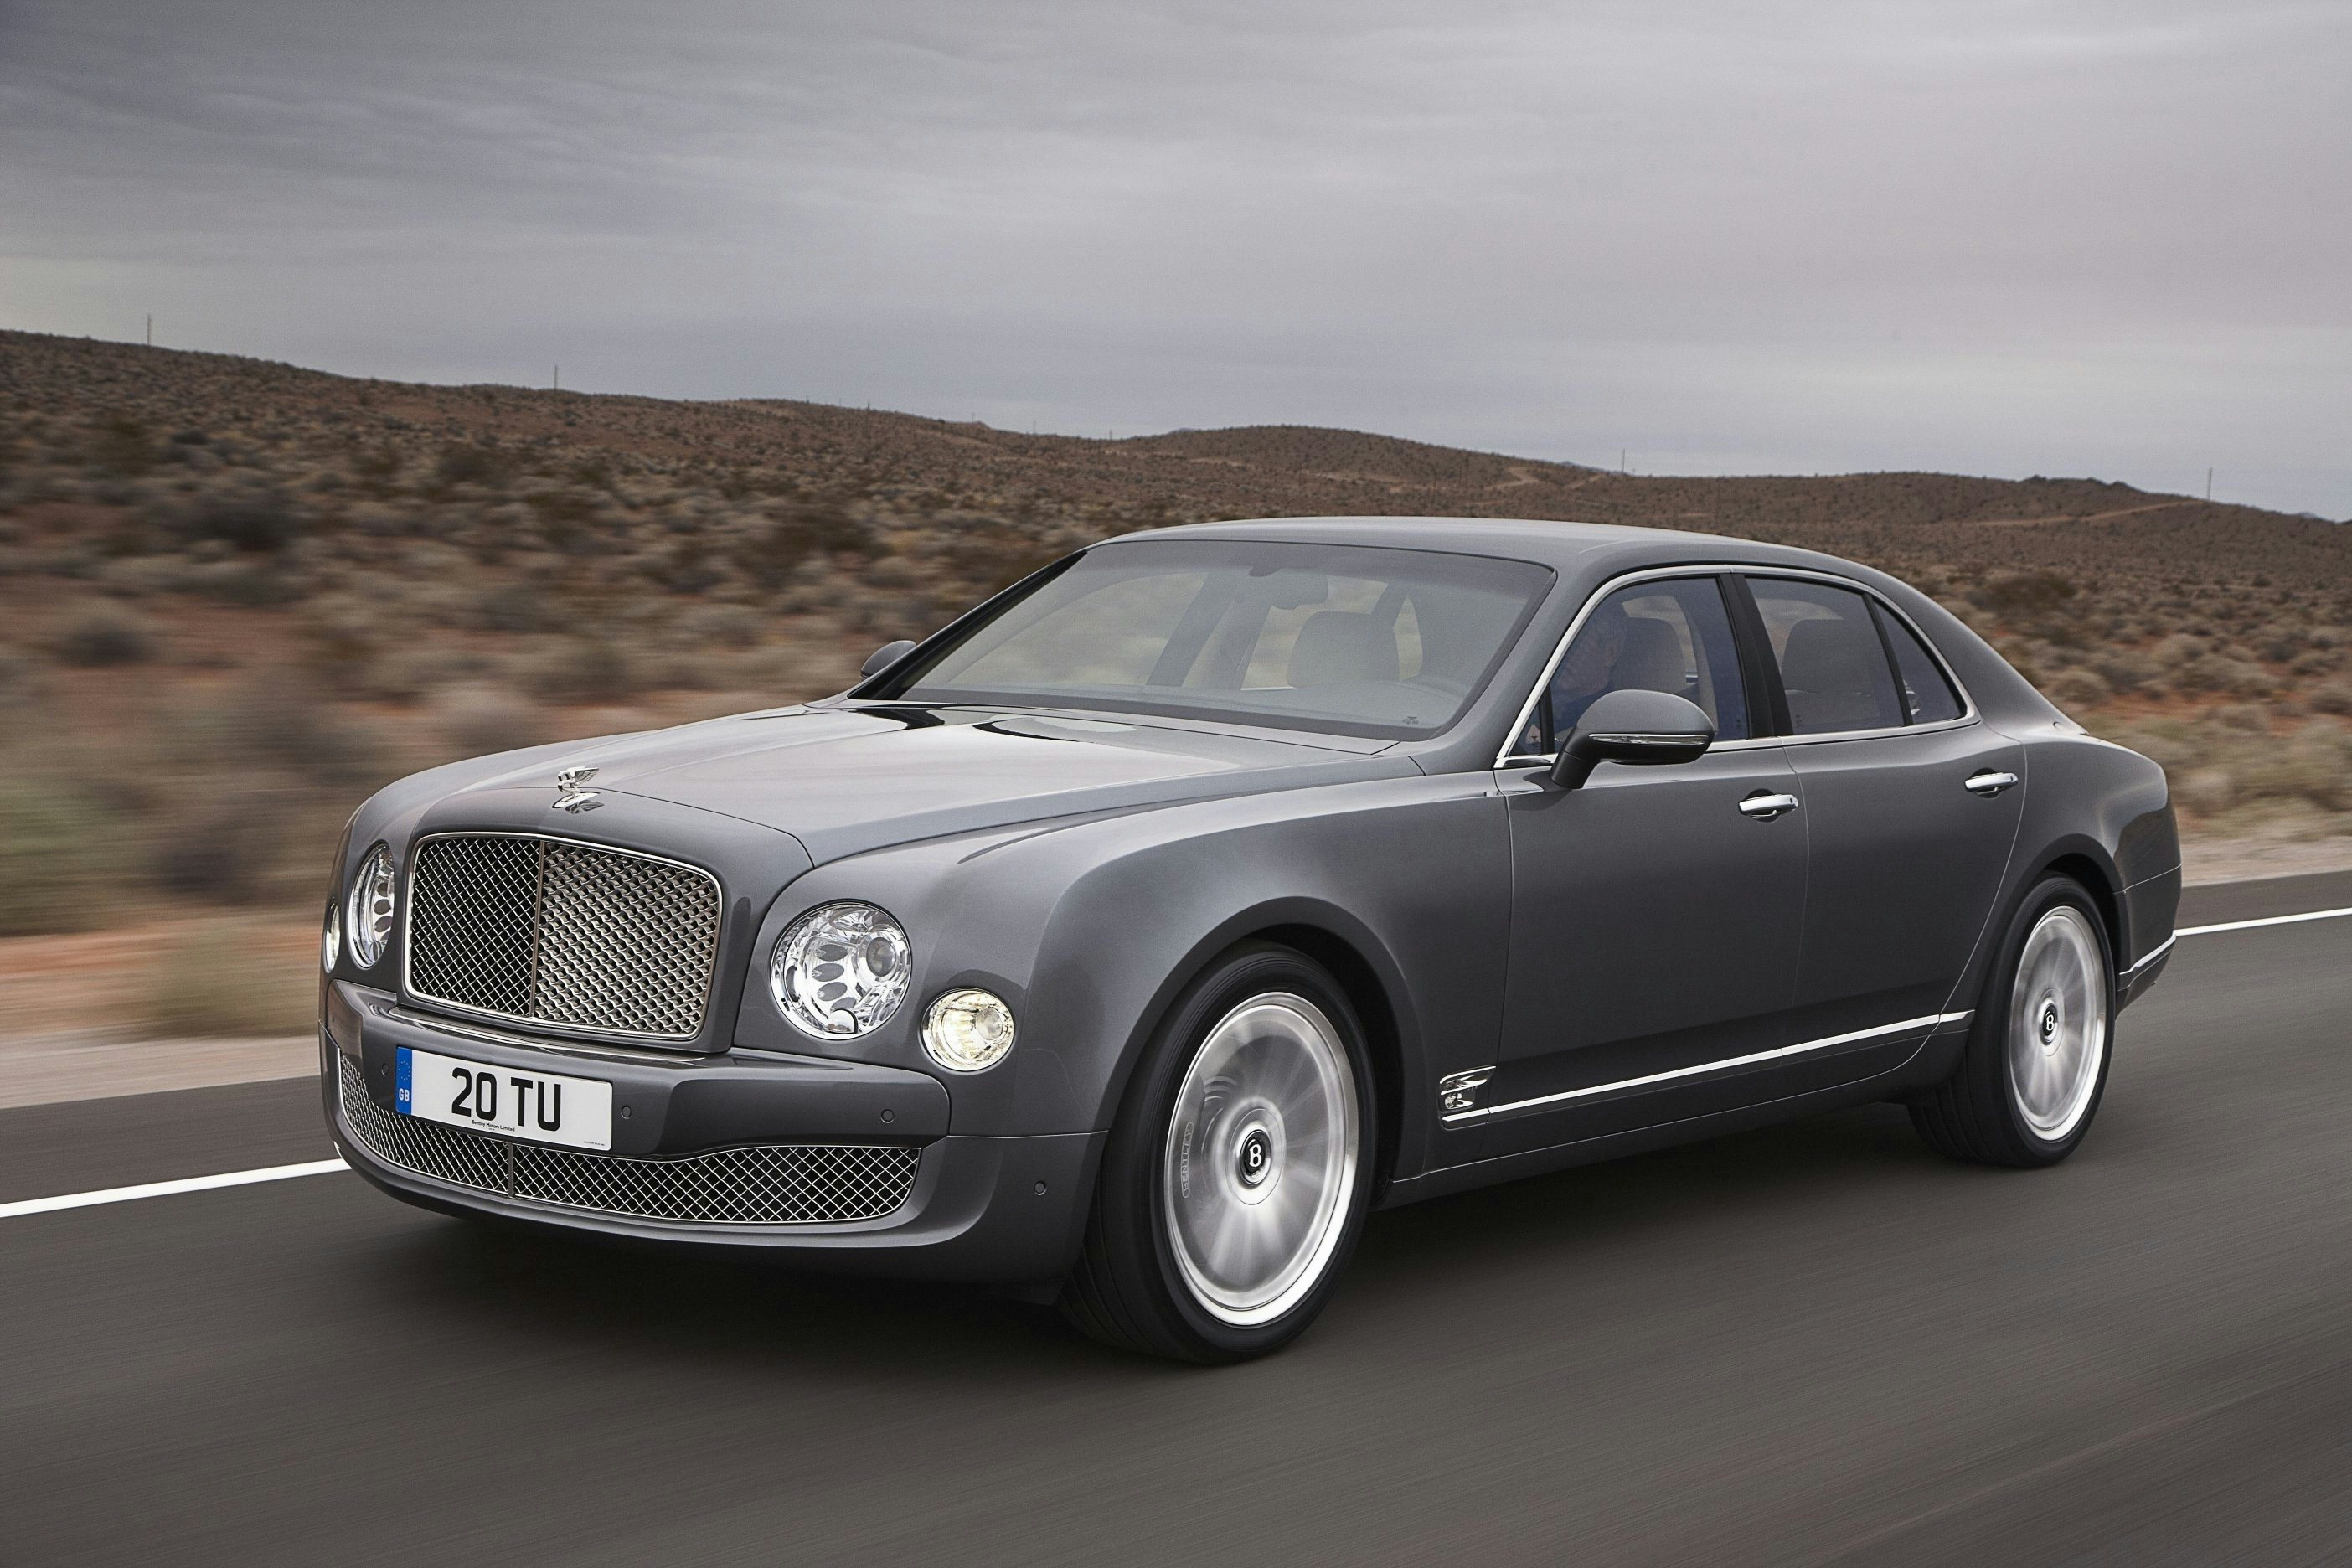 The Bentley Mulsanne has proven immensely popular in the China market